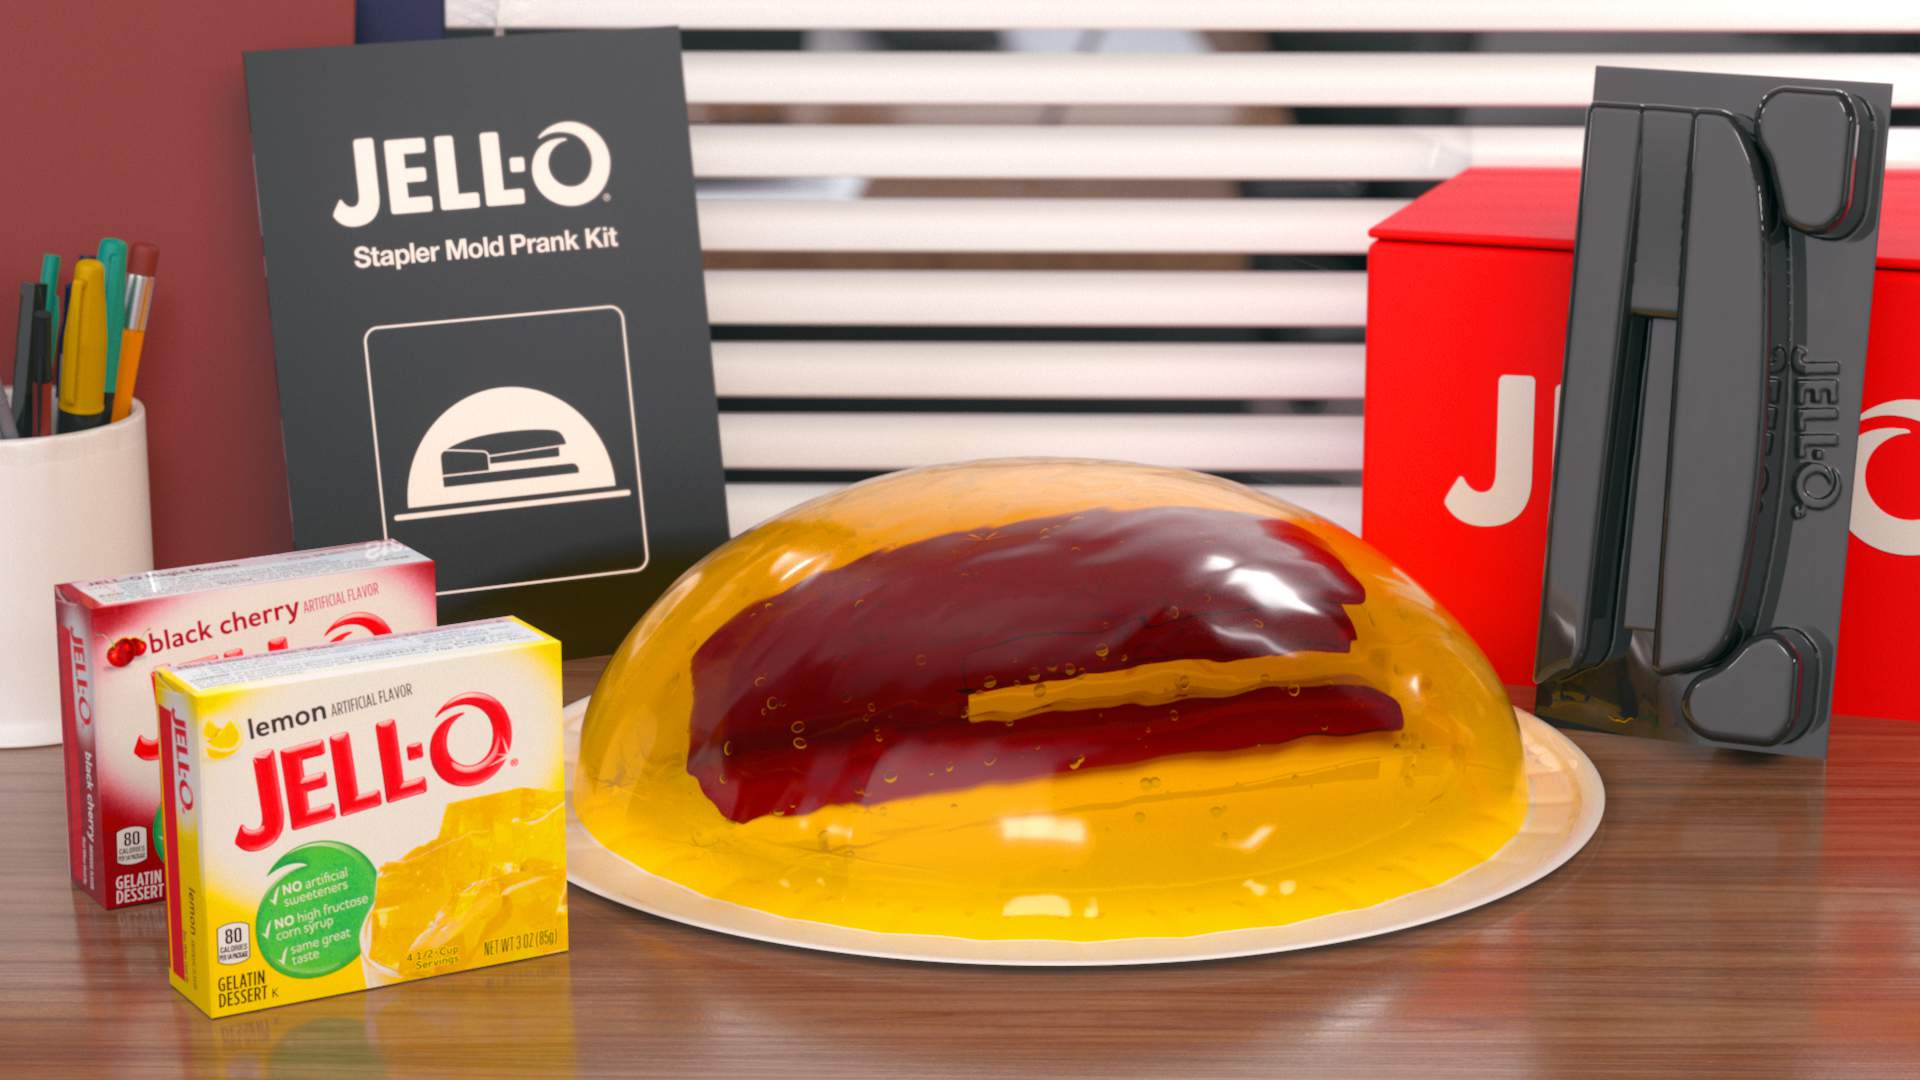 You could win a JELL-O stapler mold prank kit and recreate ‘The Office’ prank